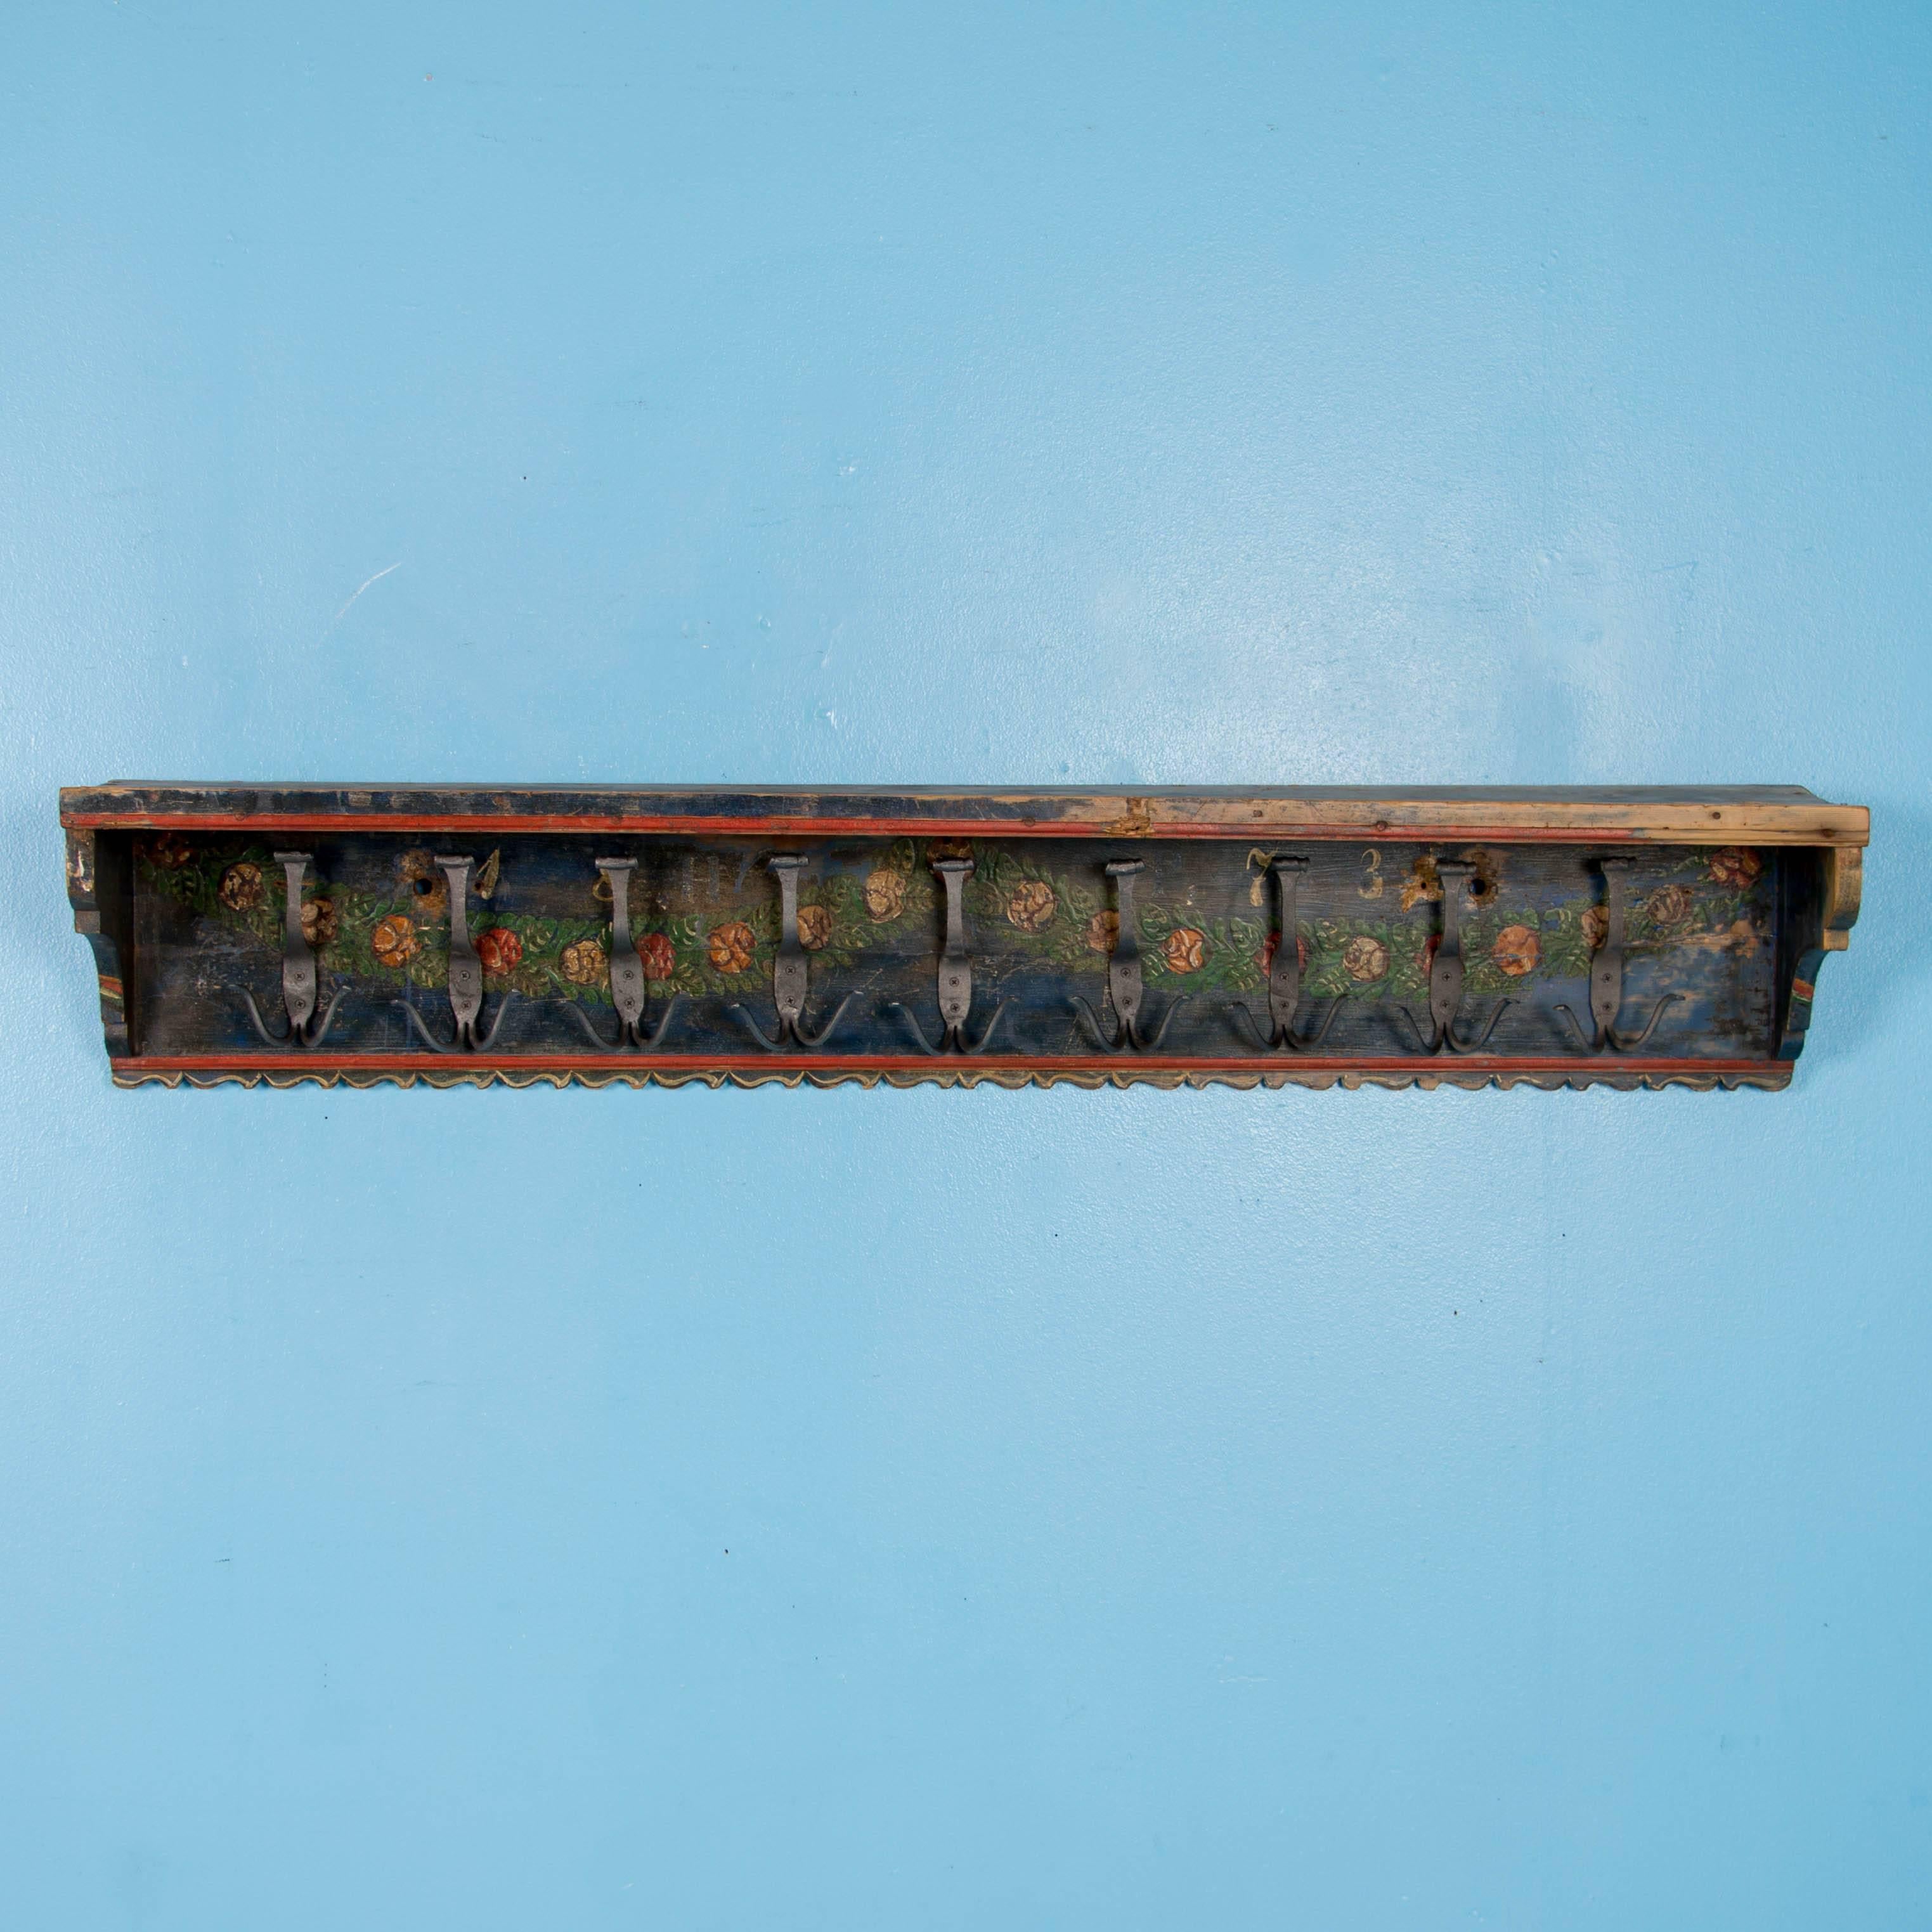 This delightful hanging shelf/rack still maintains its original floral Folk Art paint in reds and yellow over a blue colored background with date of 1873. ?Painted racks with a shelf above and multiple hooks were common elements in a European